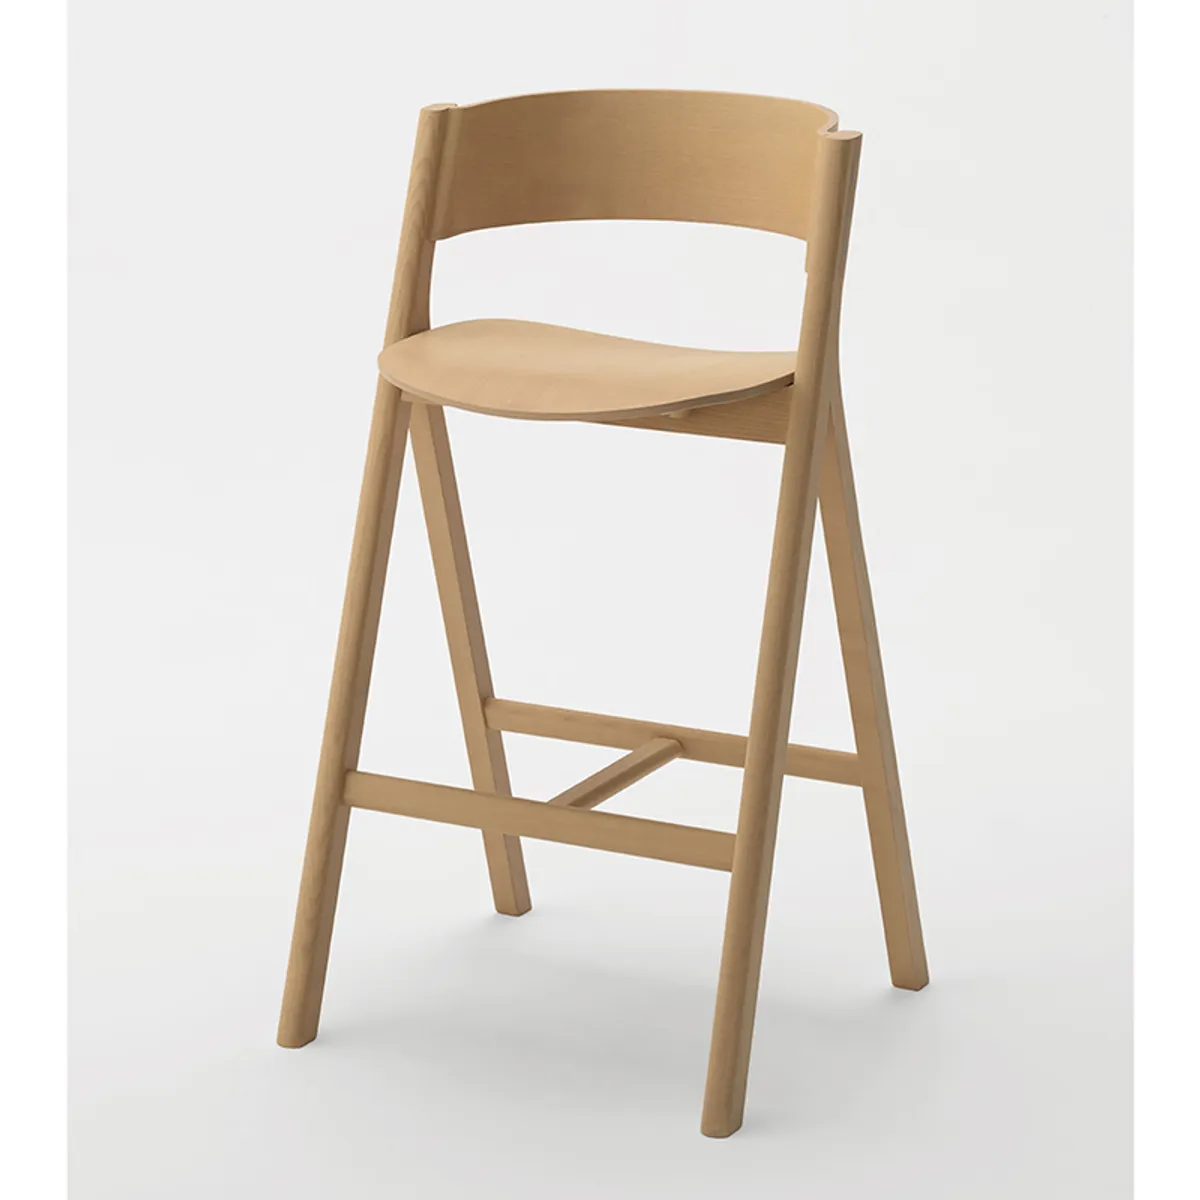 Folly Bar Stool 3 02 0 Inside Out Contracts